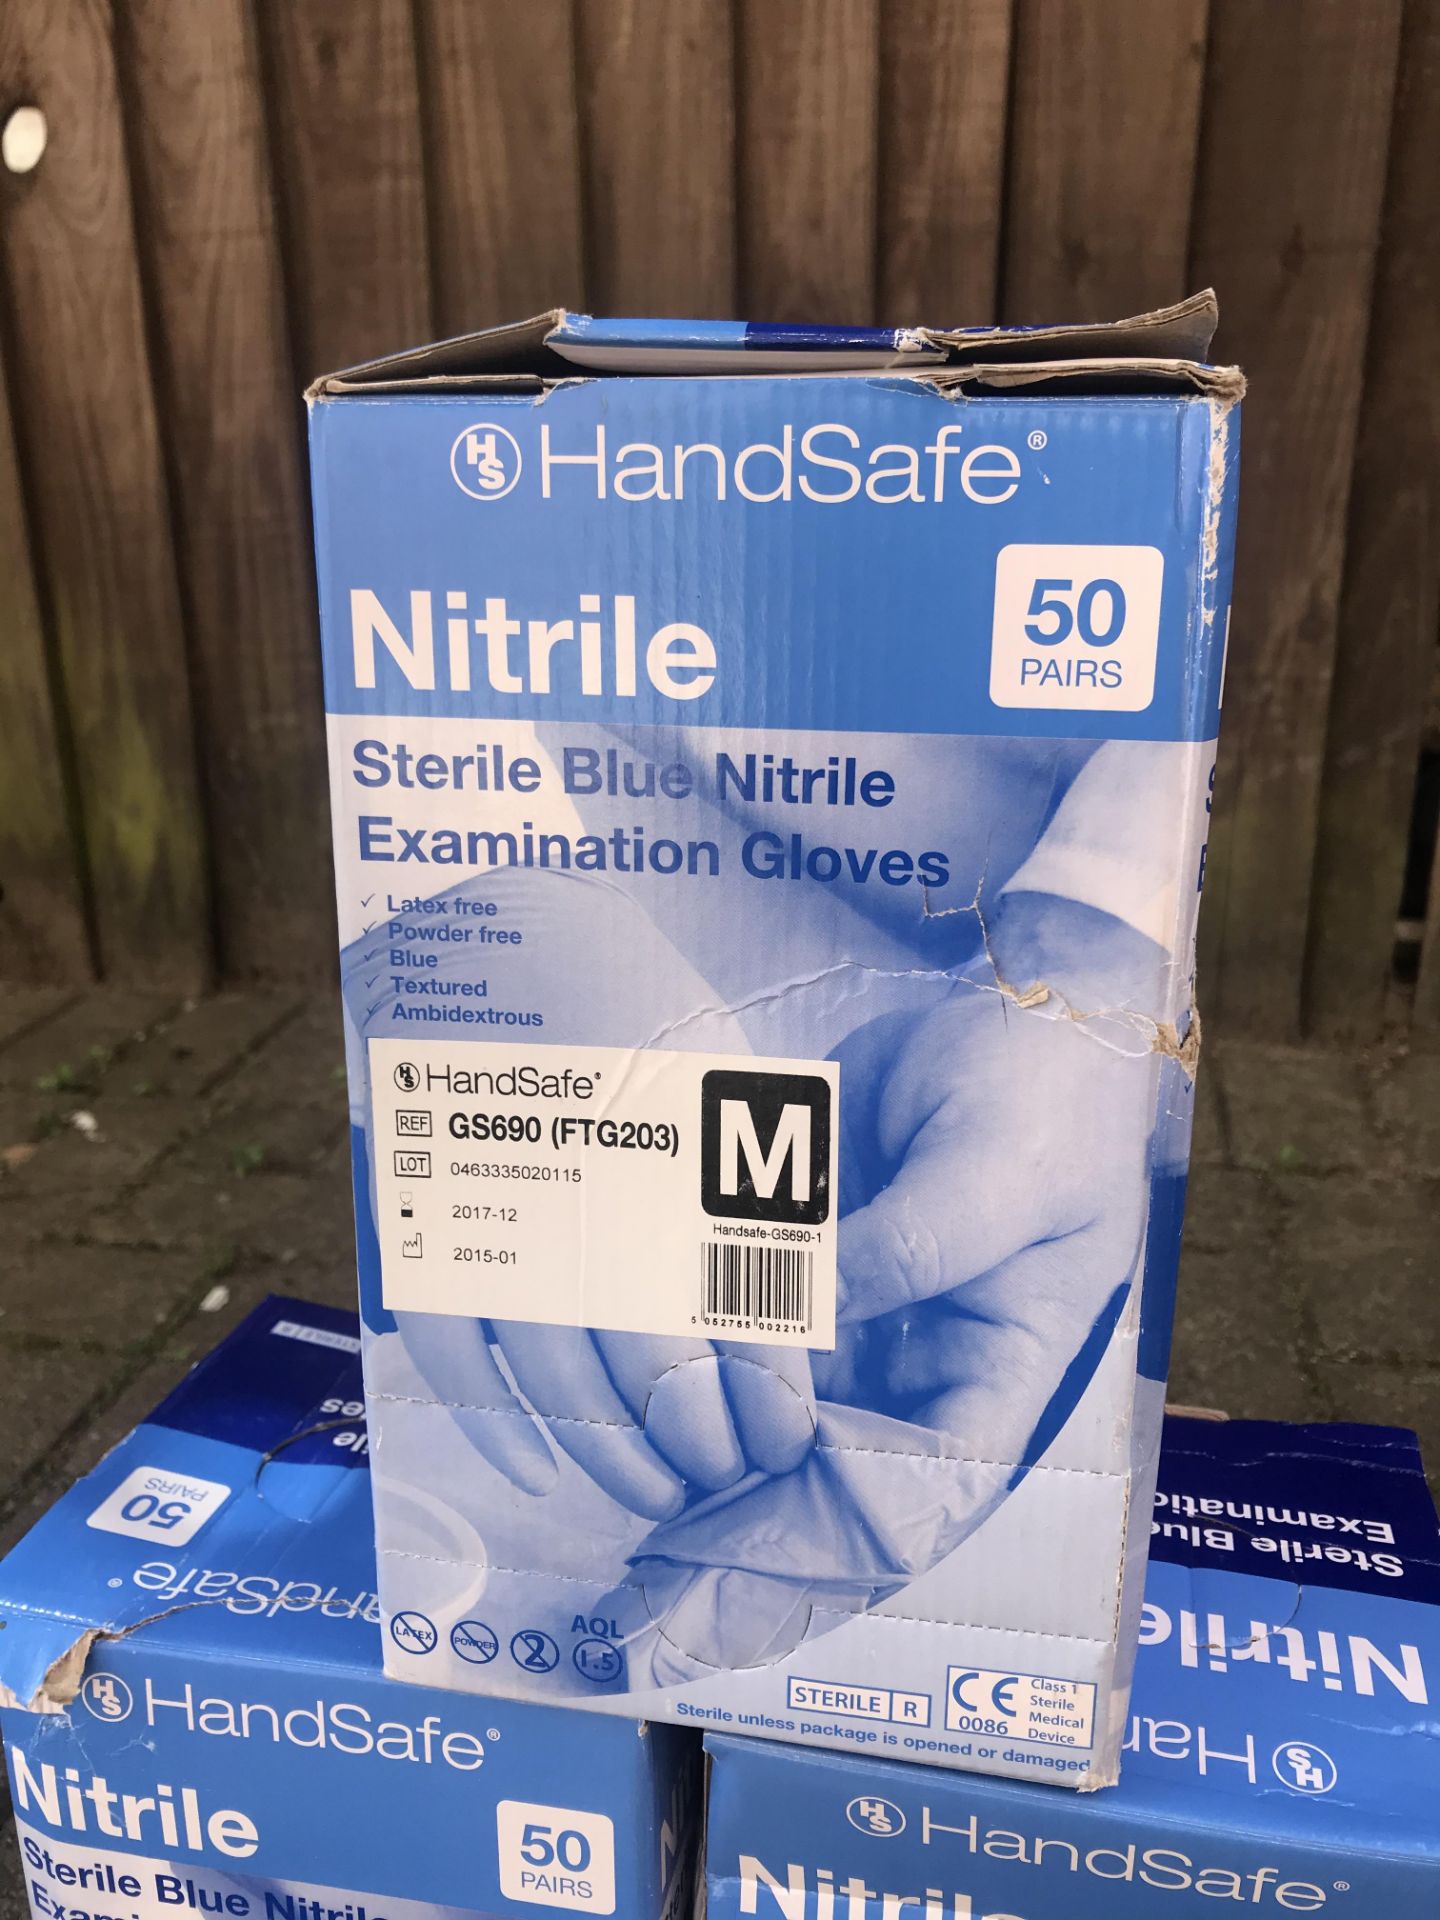 300 HANDSAFE NITRILE STERILE BLUE EXAMINATION GLOVES QTY: 3 CASES EACH CASE HAS 100 GLOVES PER BOX - Image 3 of 4